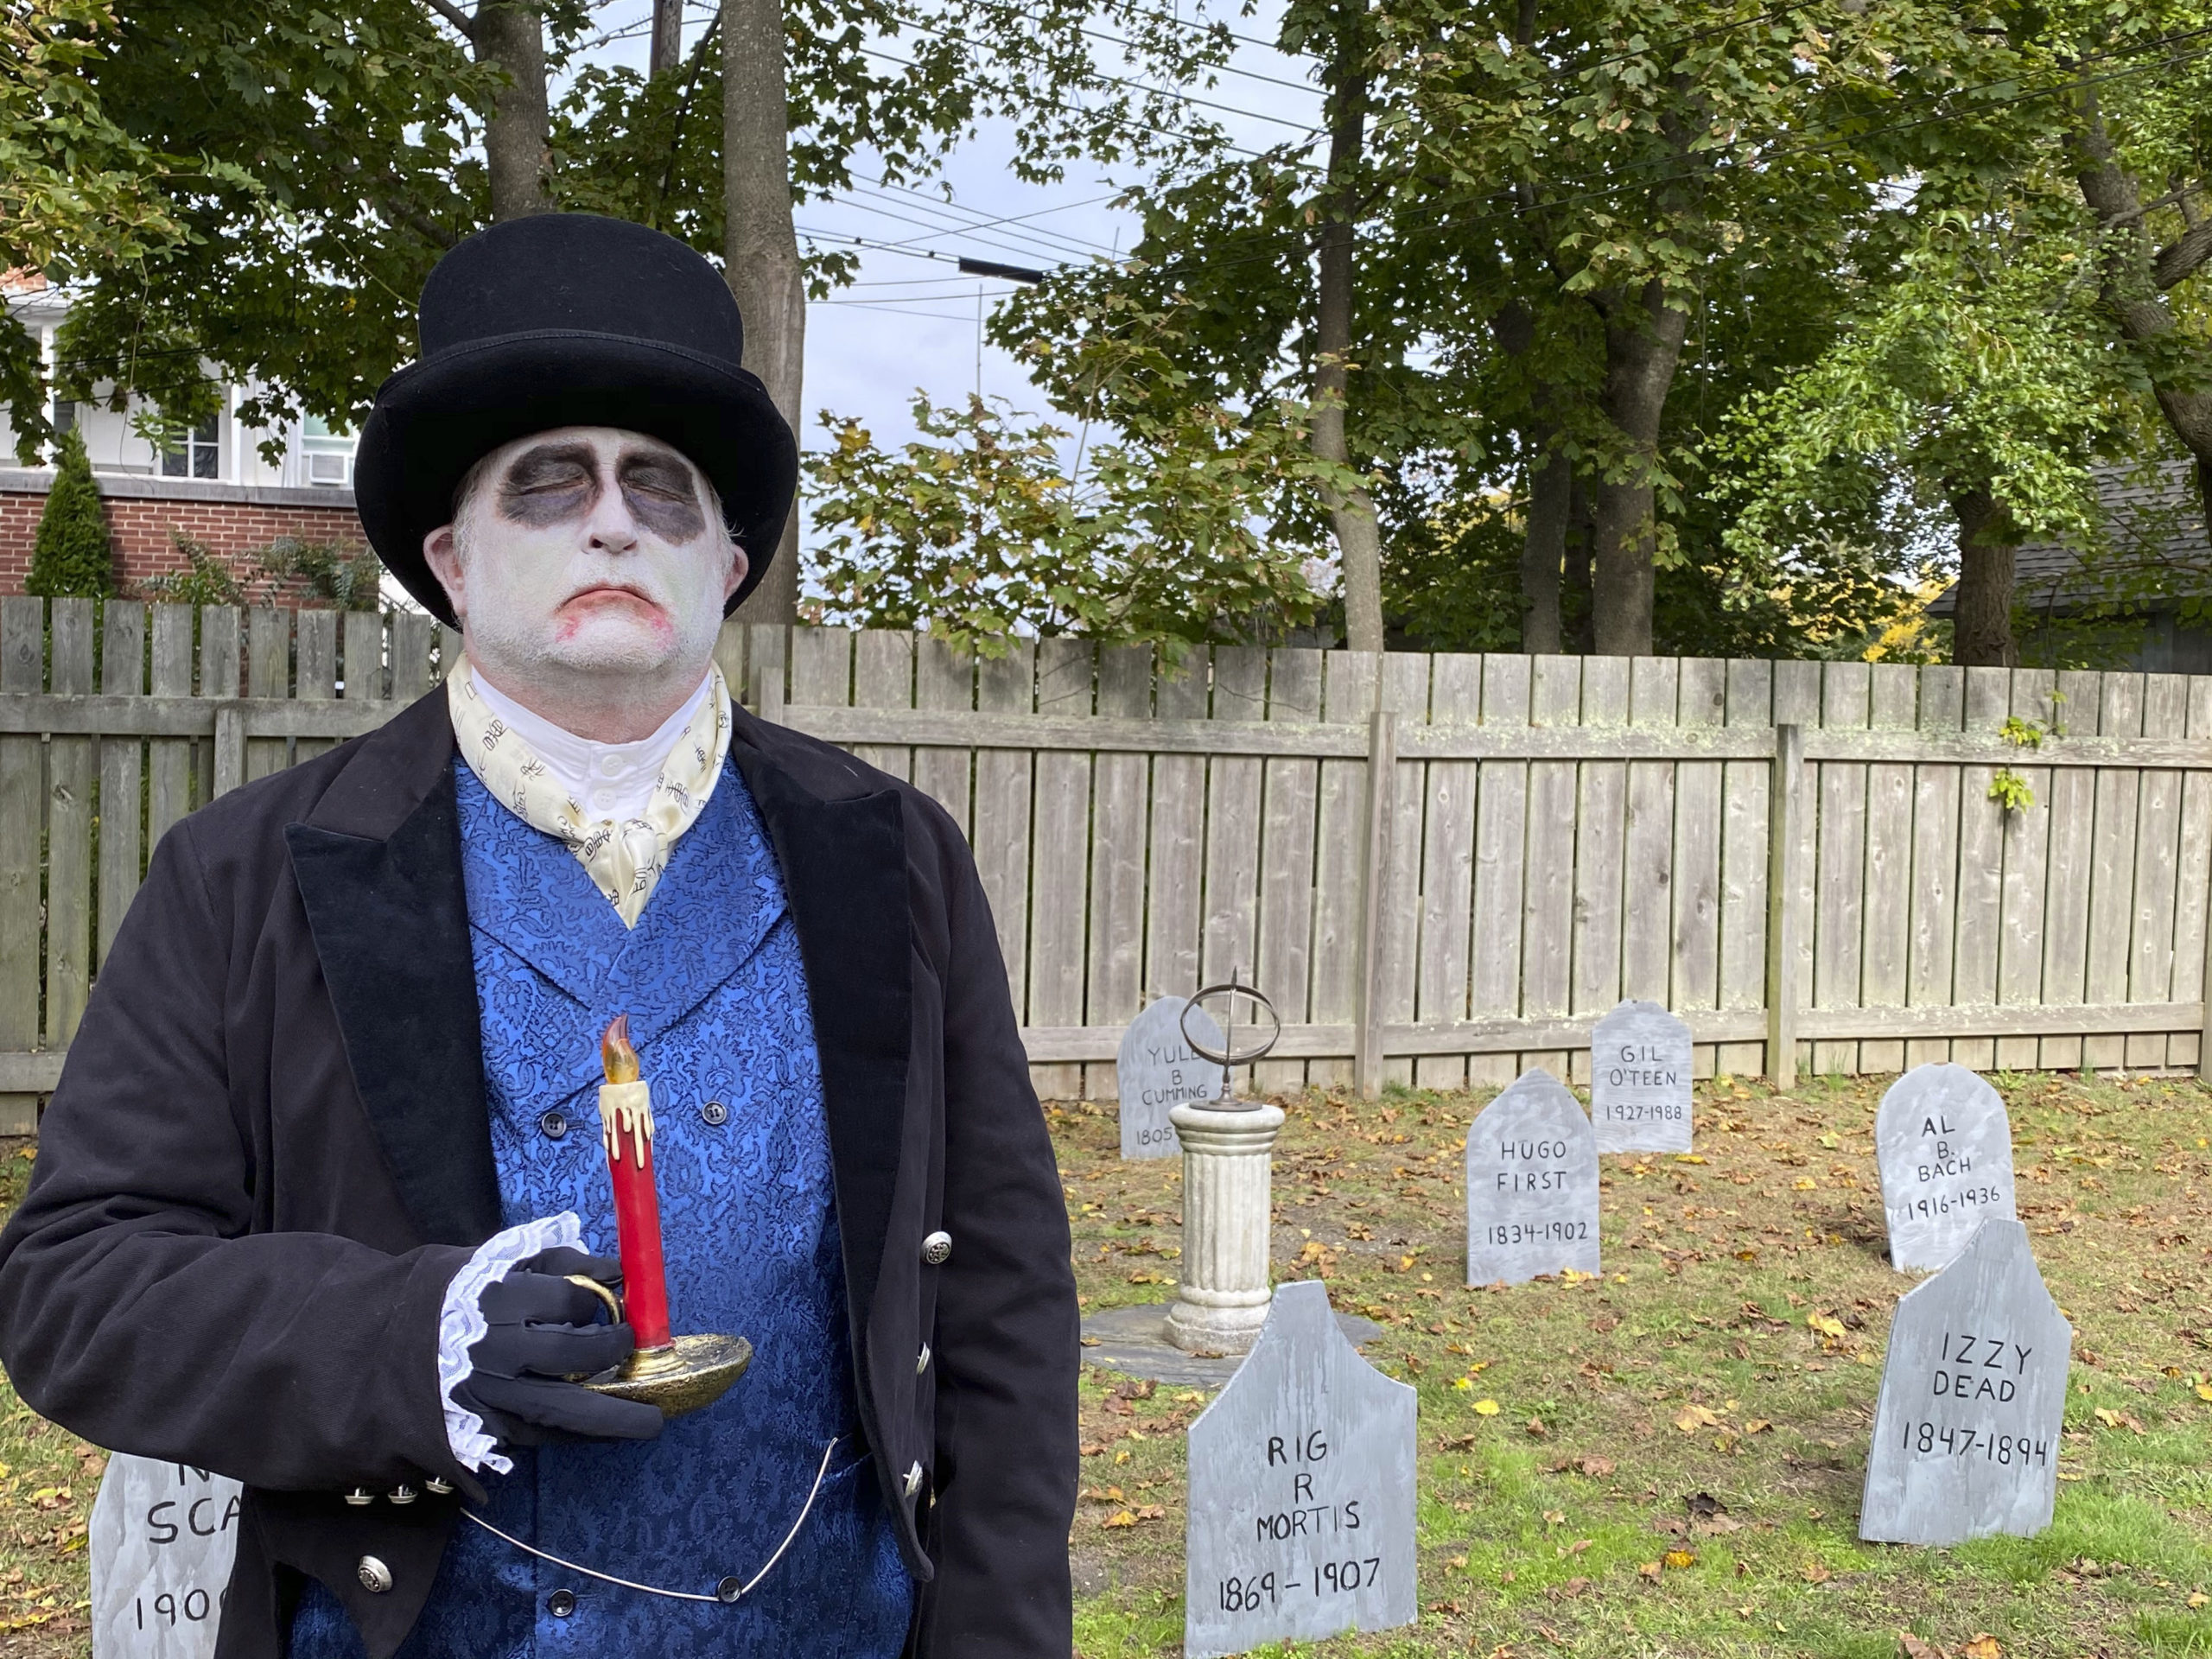 The Haunted Village at the Southampton History Museum on Saturday. The grounds of the Rogers Mansion are decorated for Halloween and are inhabited by witches, ghouls and even a plague doctor. The Haunted Village will be opened on Saturday October 31 from 2 to 4 p.m. Visitors are encouraged to wear their costumes. Reservations required with timed entrances for a 20 minute tour. Limited to 100 people at one time, only family groups of up to 6 allowed per reservation. Children must be accompanied by an adult with a reservation. Facemasks required and social distancing strictly enforced. Call (631) 283-2494 or visit southamptonhistory.org for more information. DANA SHAW